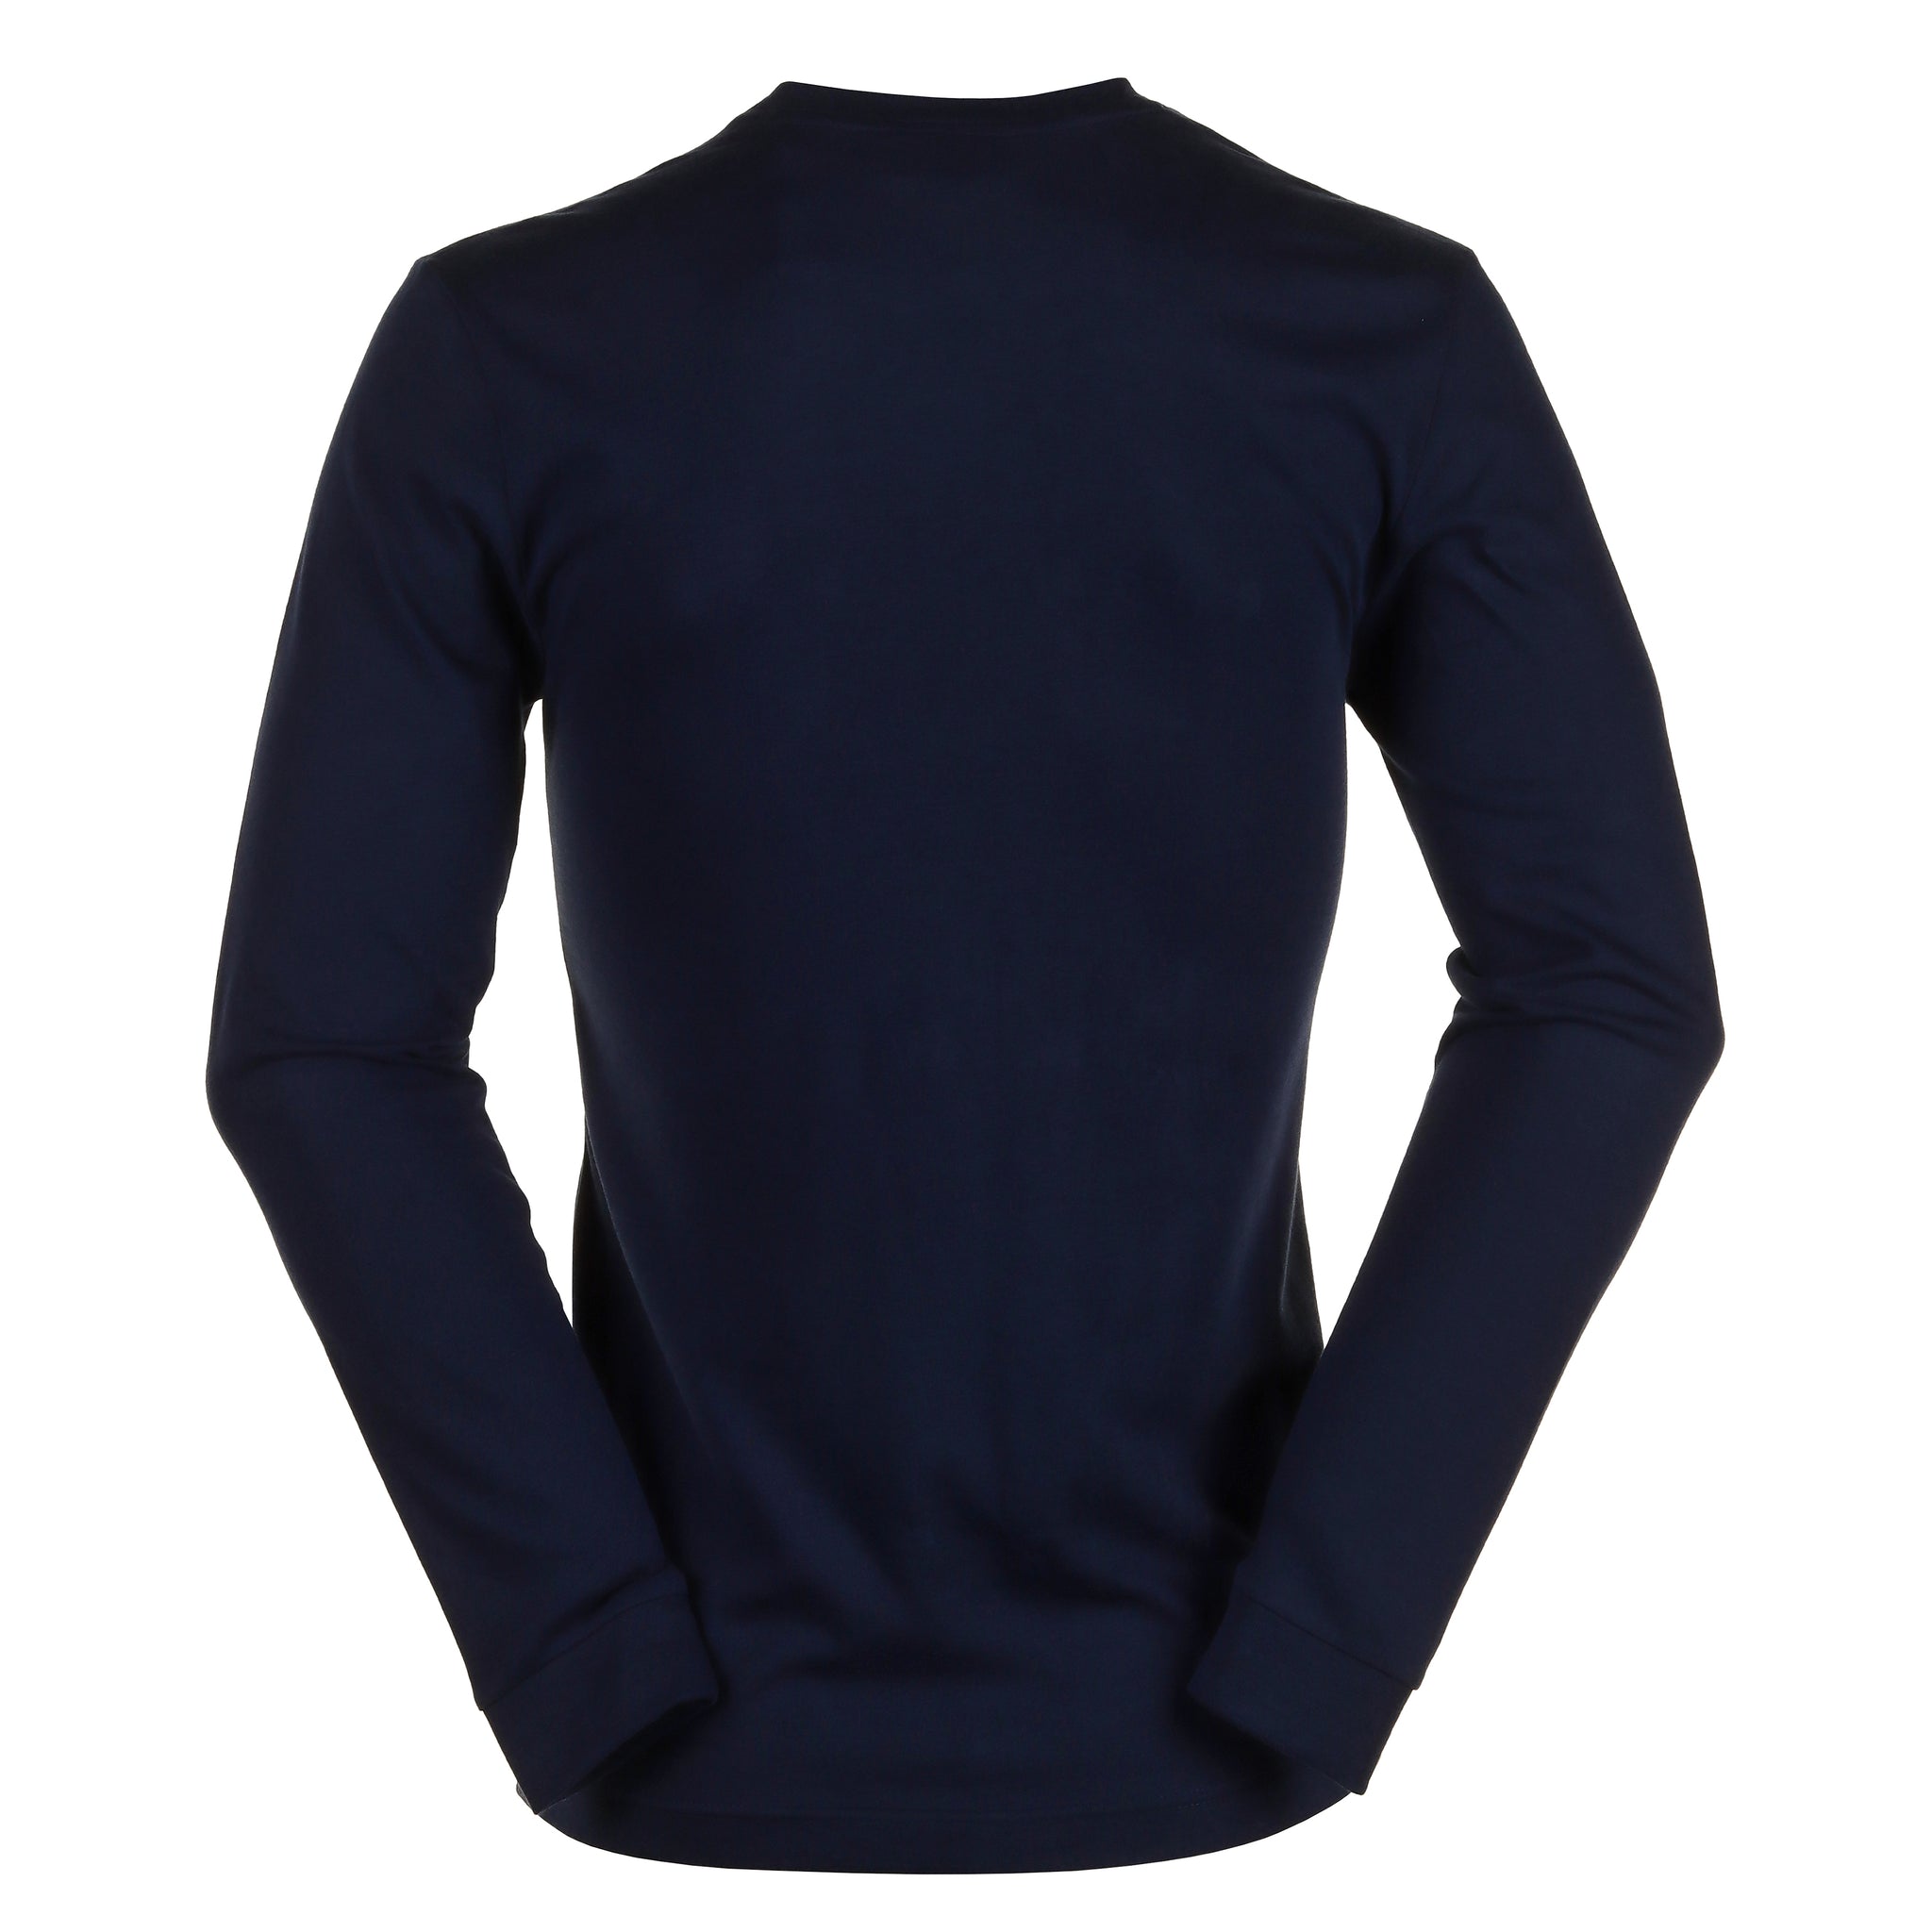 Lacoste Long Sleeve Tee Shirt TH3662 Navy 166 | Function18